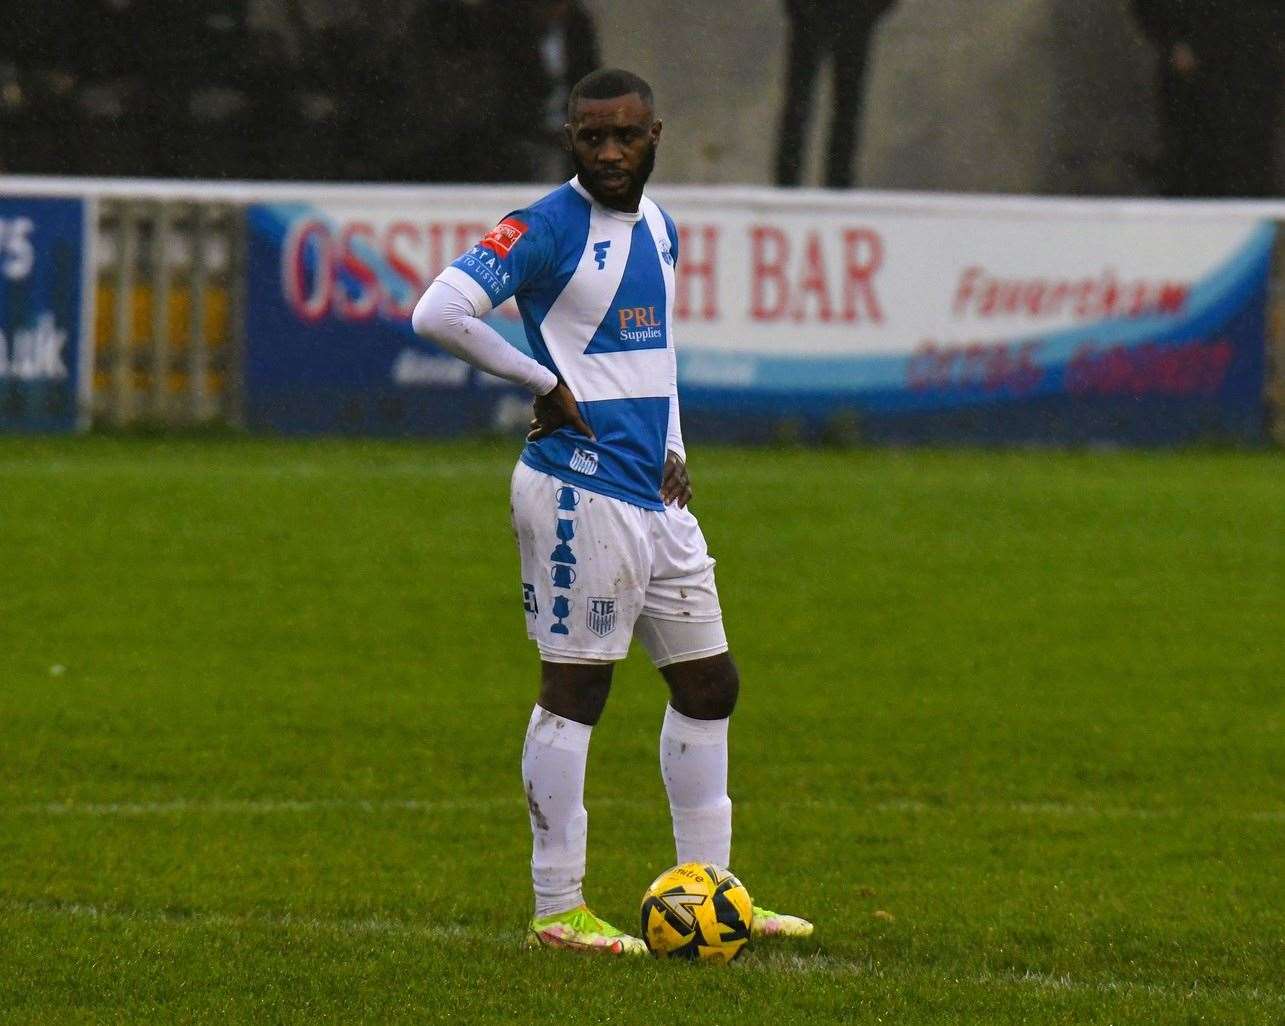 Striker Warren Mfula at Salters Lane during his time with Sheppey. Picture: Marc Richards